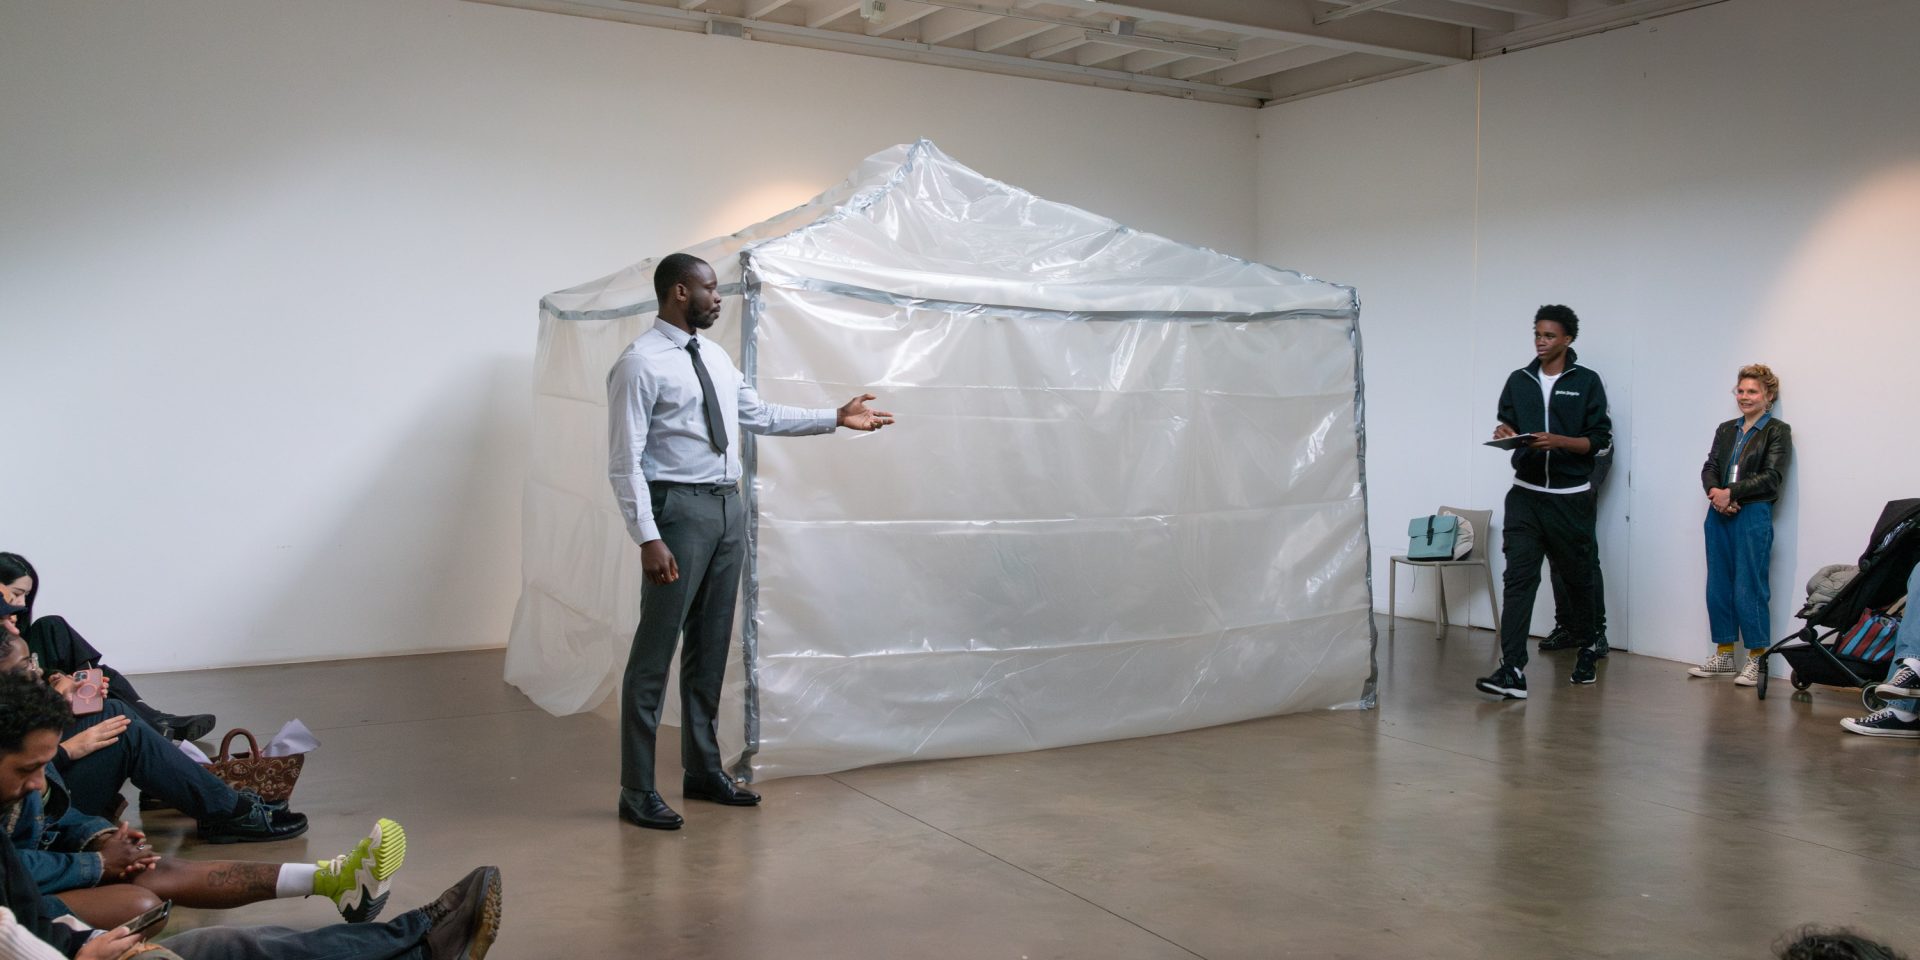 Artist Motunrayo Akinola performs in a bright white room with people sitting on the ground.